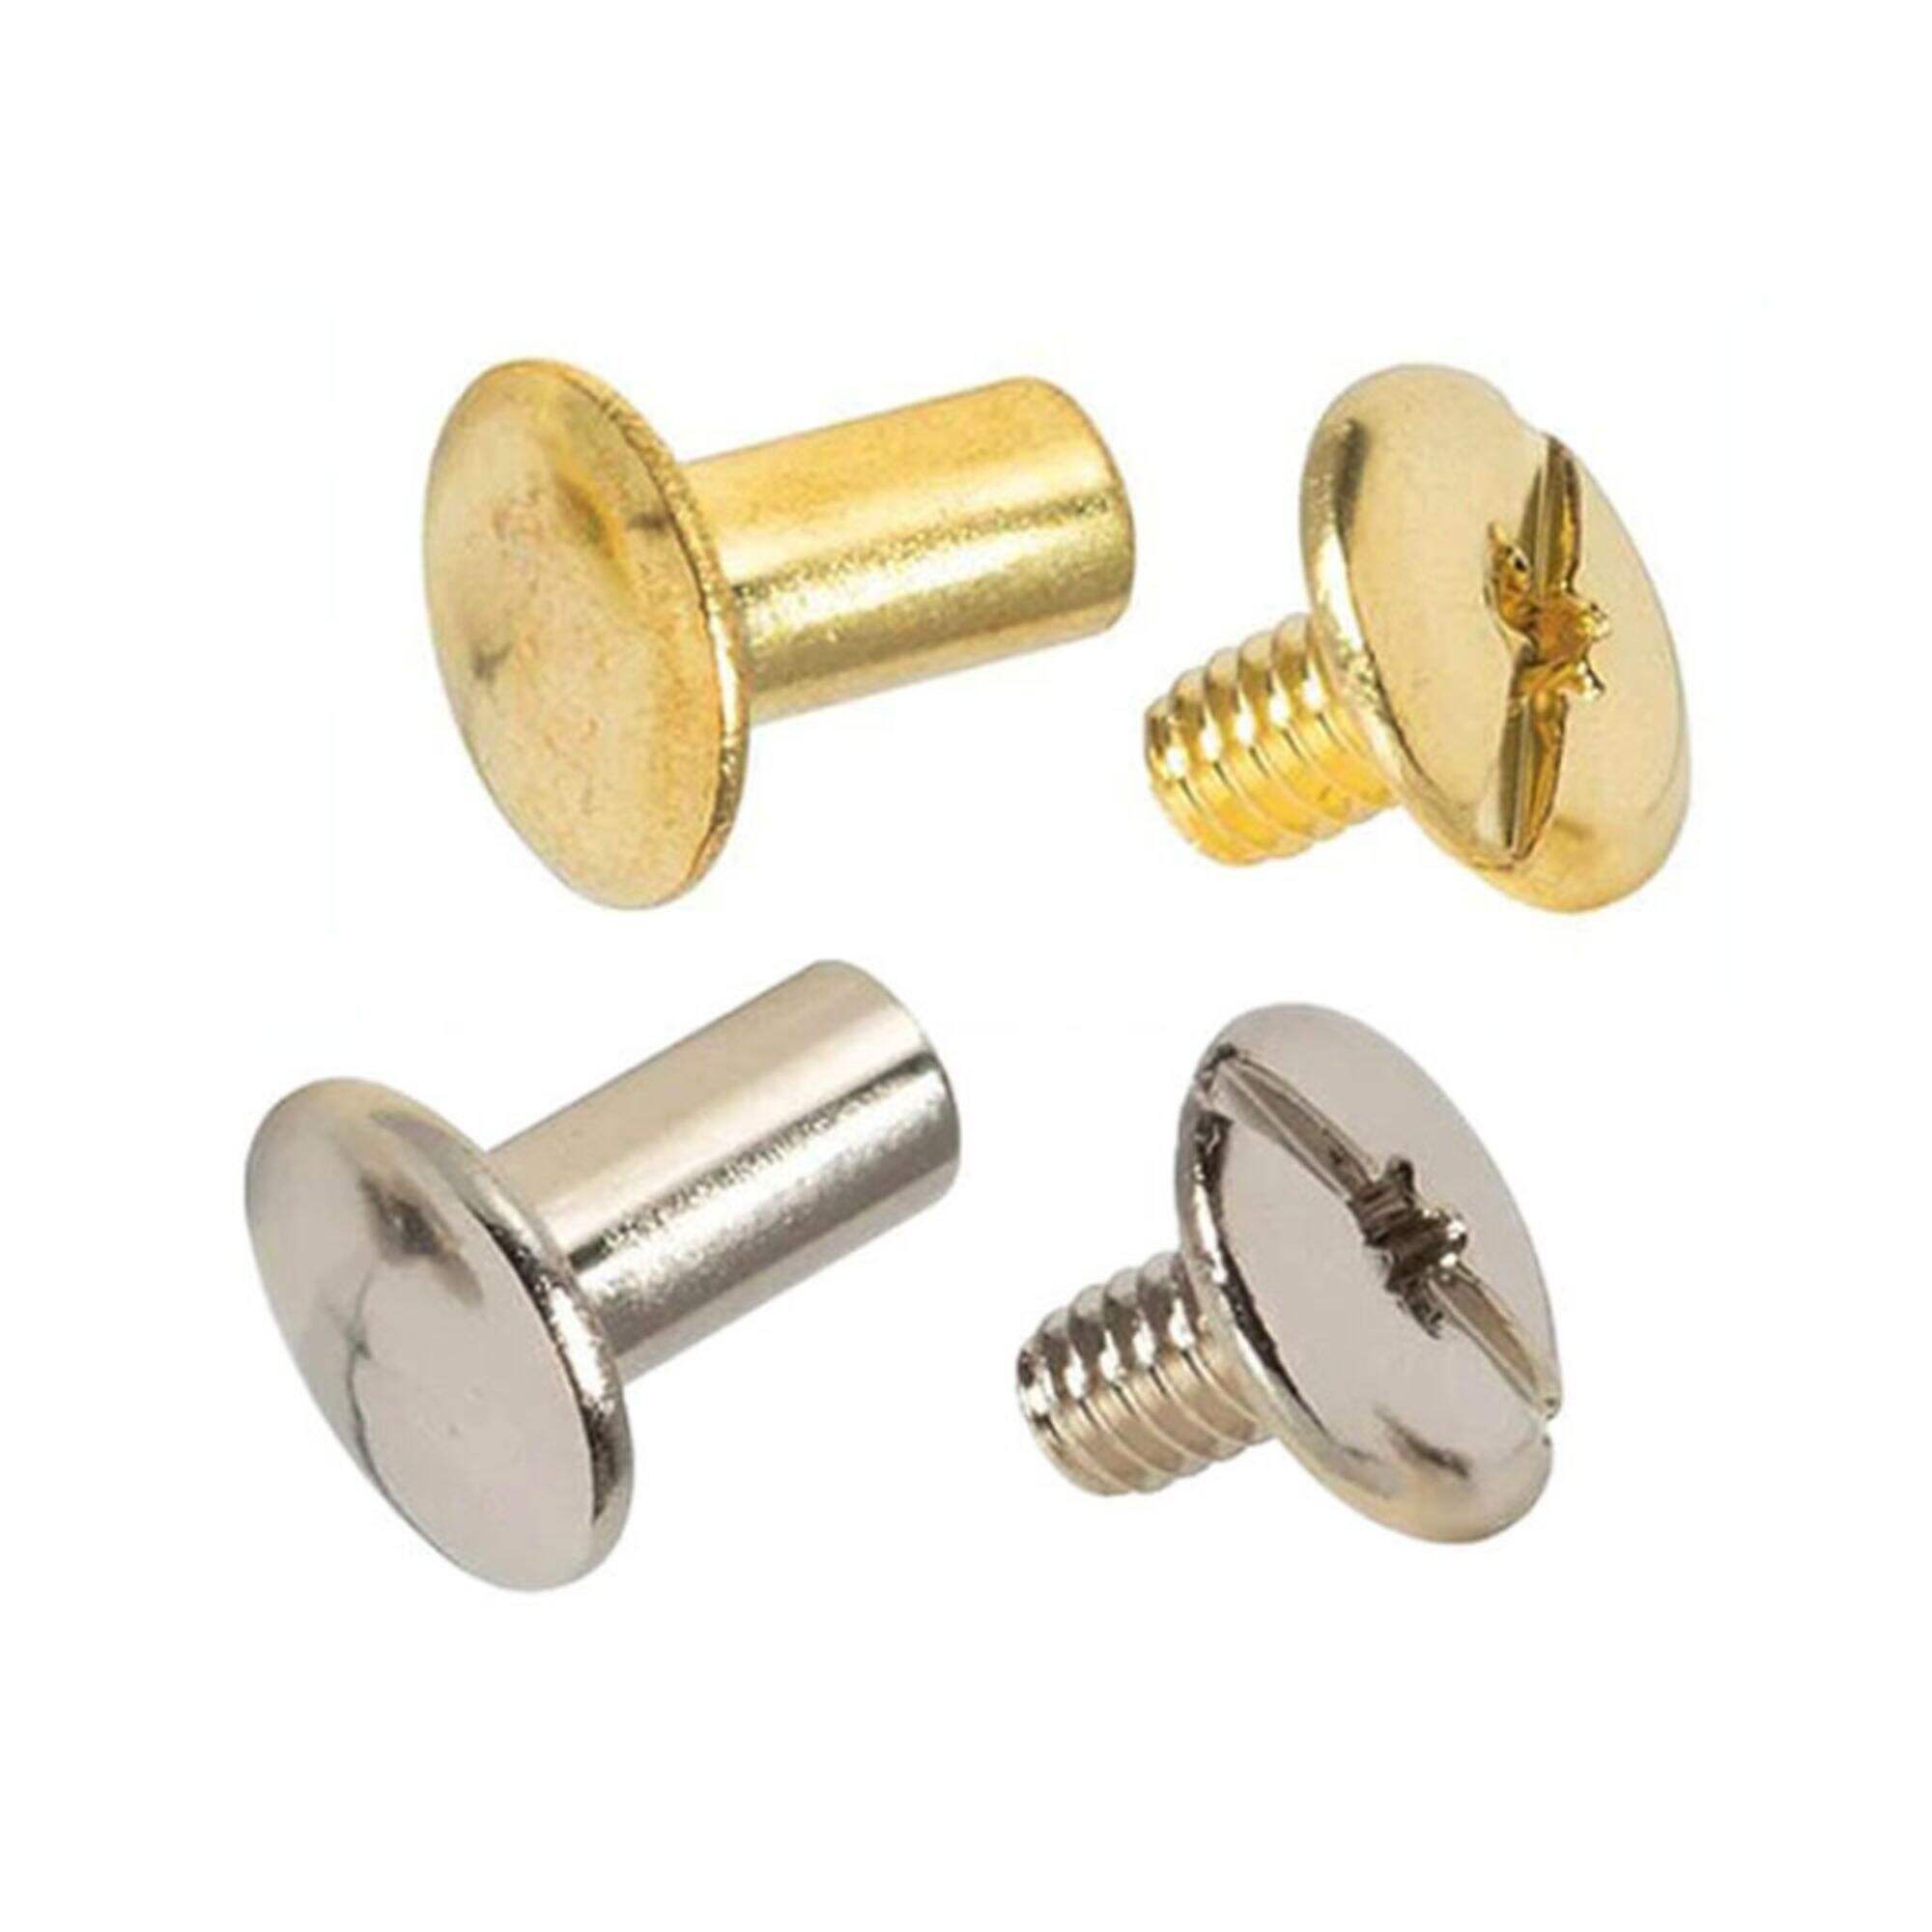 M3 Stainless Steel Brass Chicago Screw Rivets Decorative Bolts Chicago Binding Screw